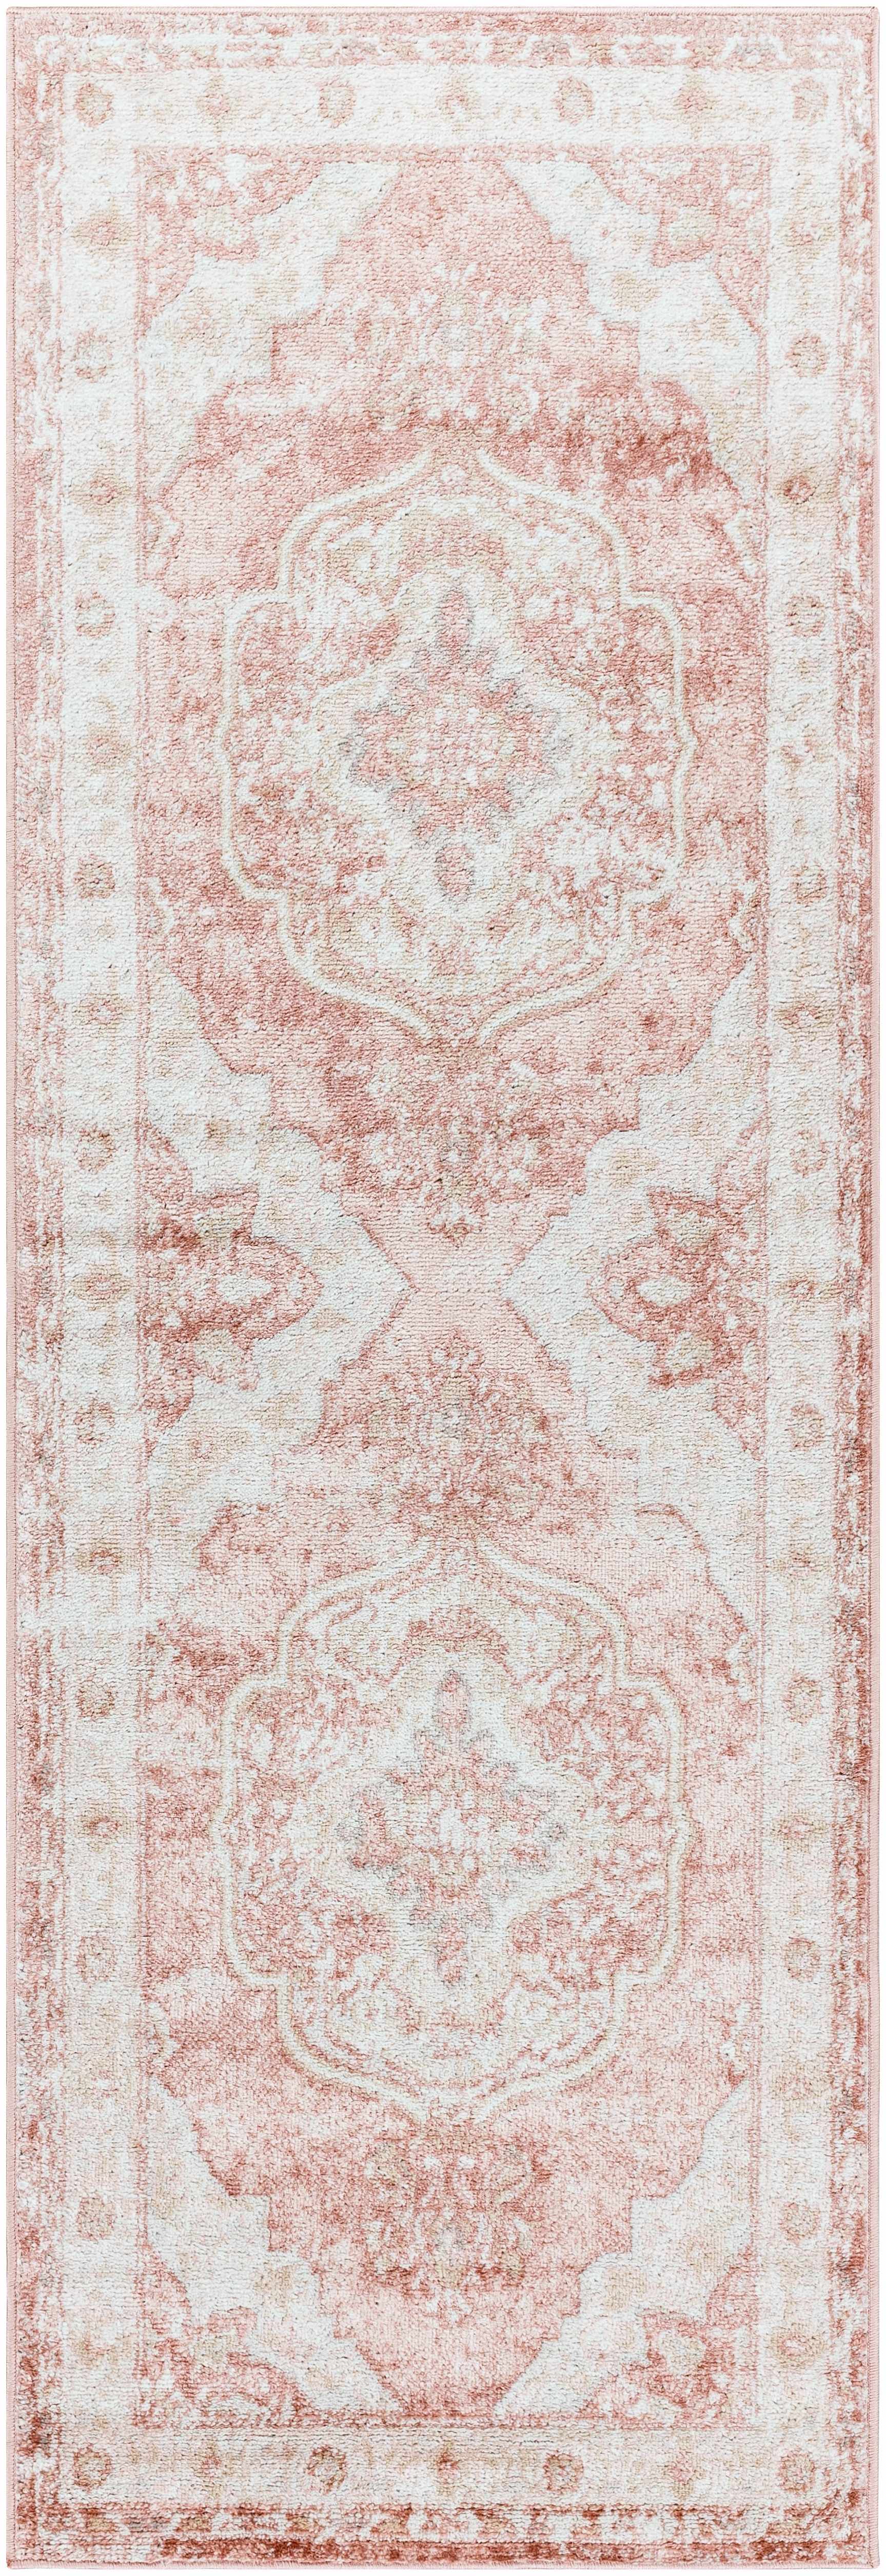 Boutique Rugs Rugs 2'7" x 10' Runner Kandos Area Rug